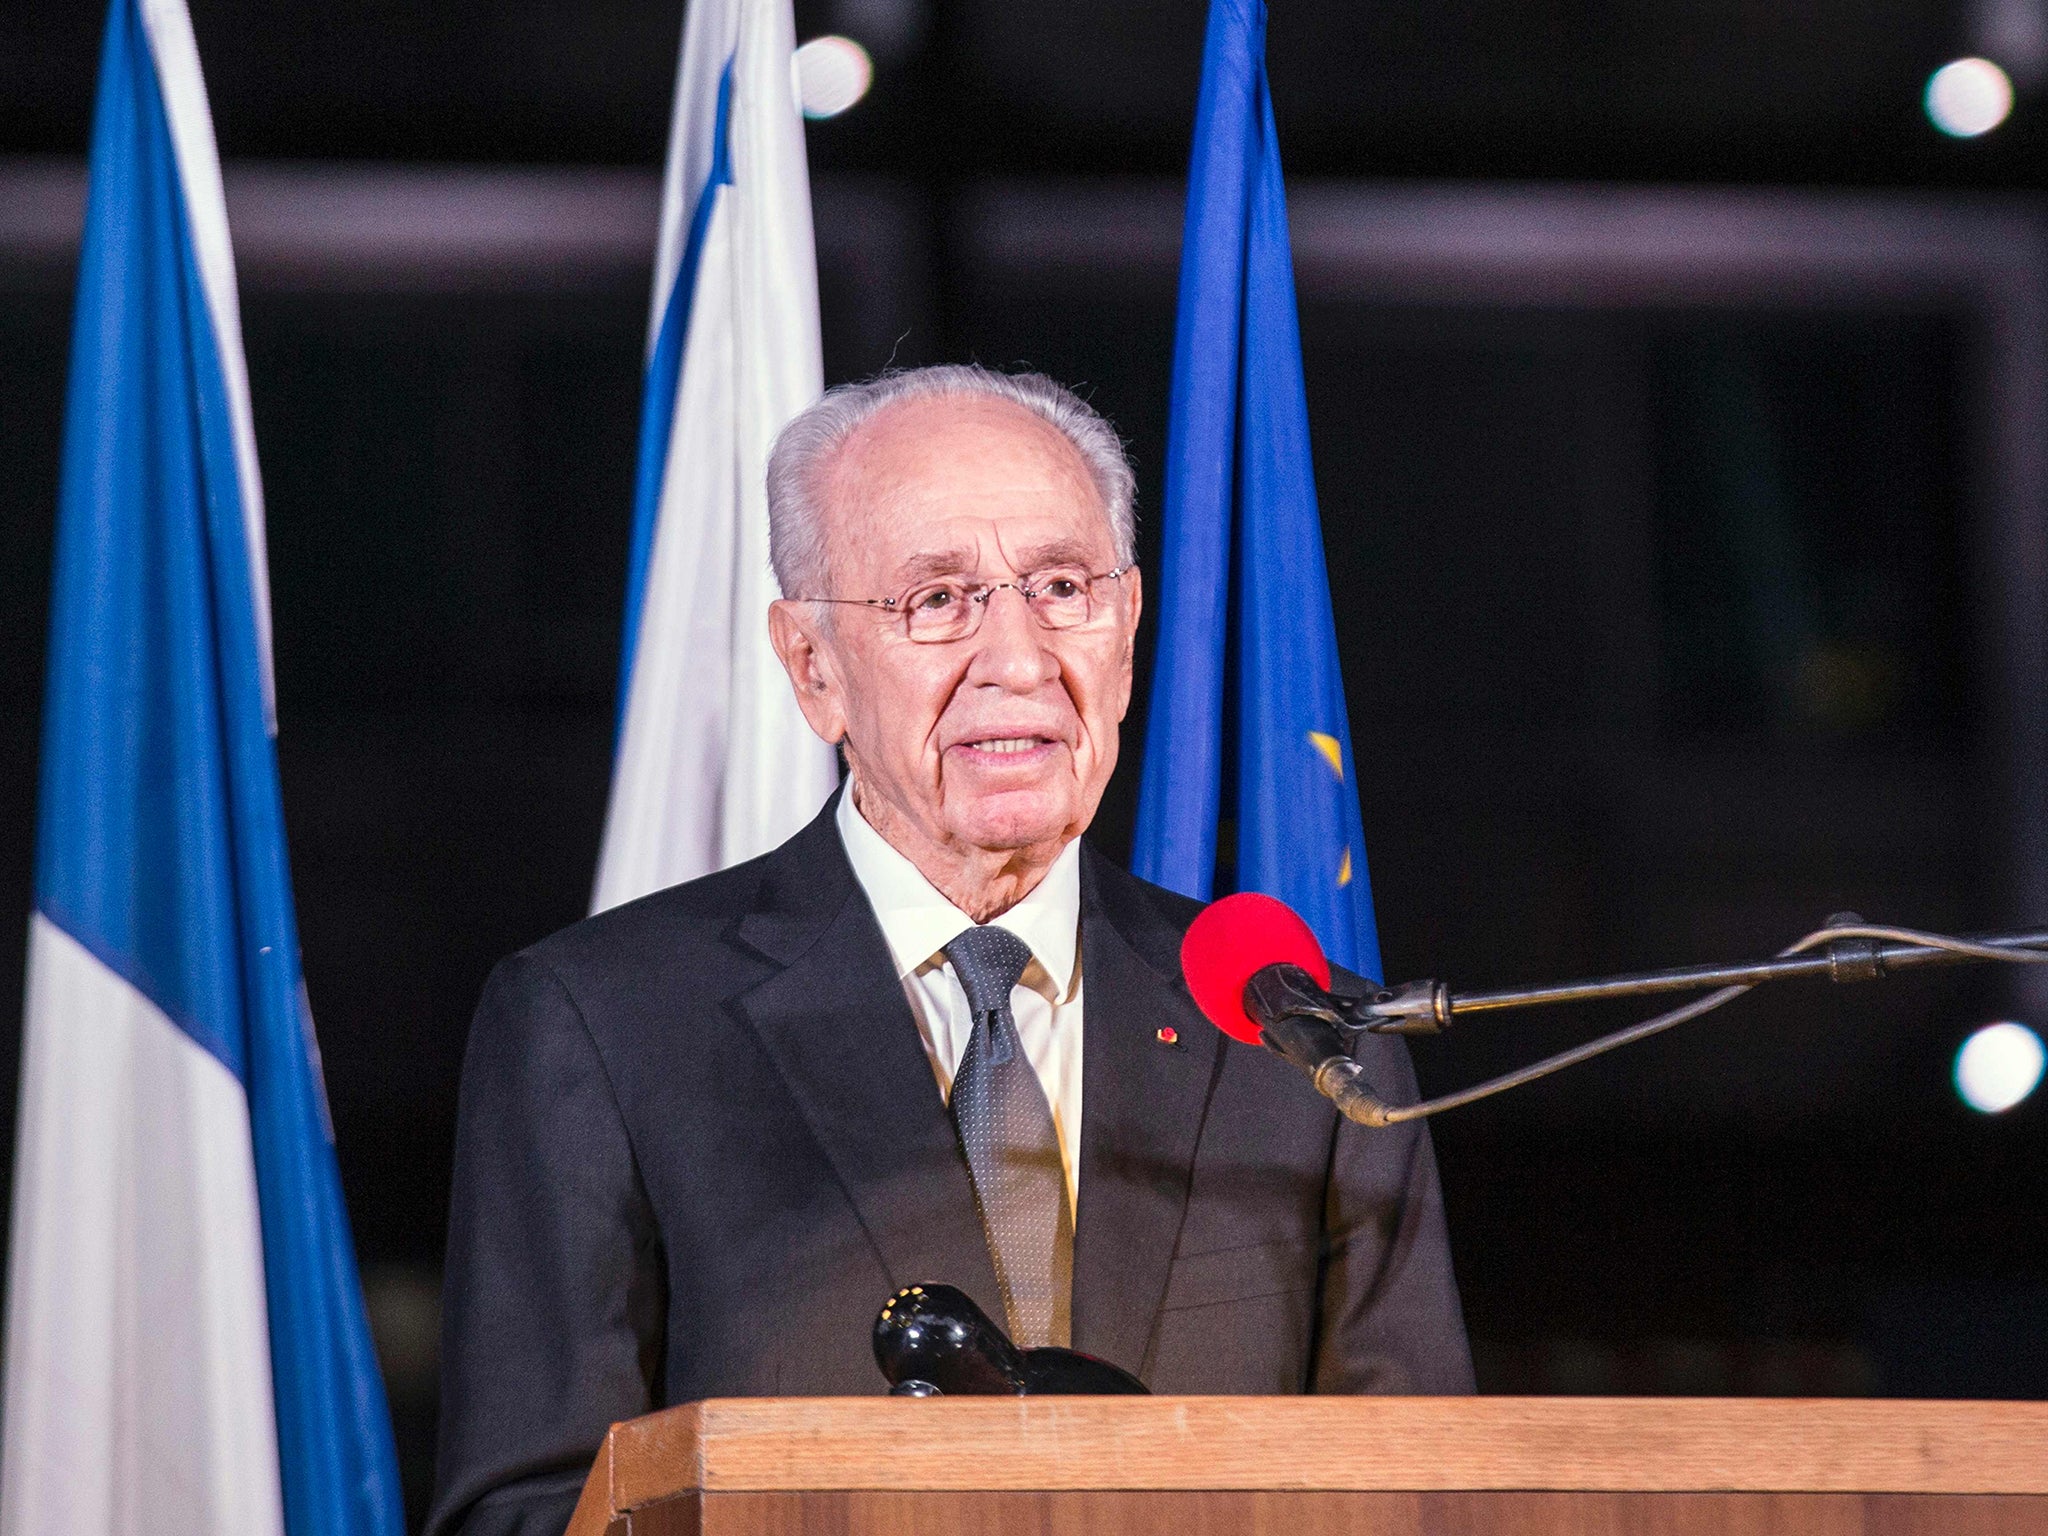 Shimon Peres delivering a speech in honor of the victims of the Paris attacks in Rabin Square